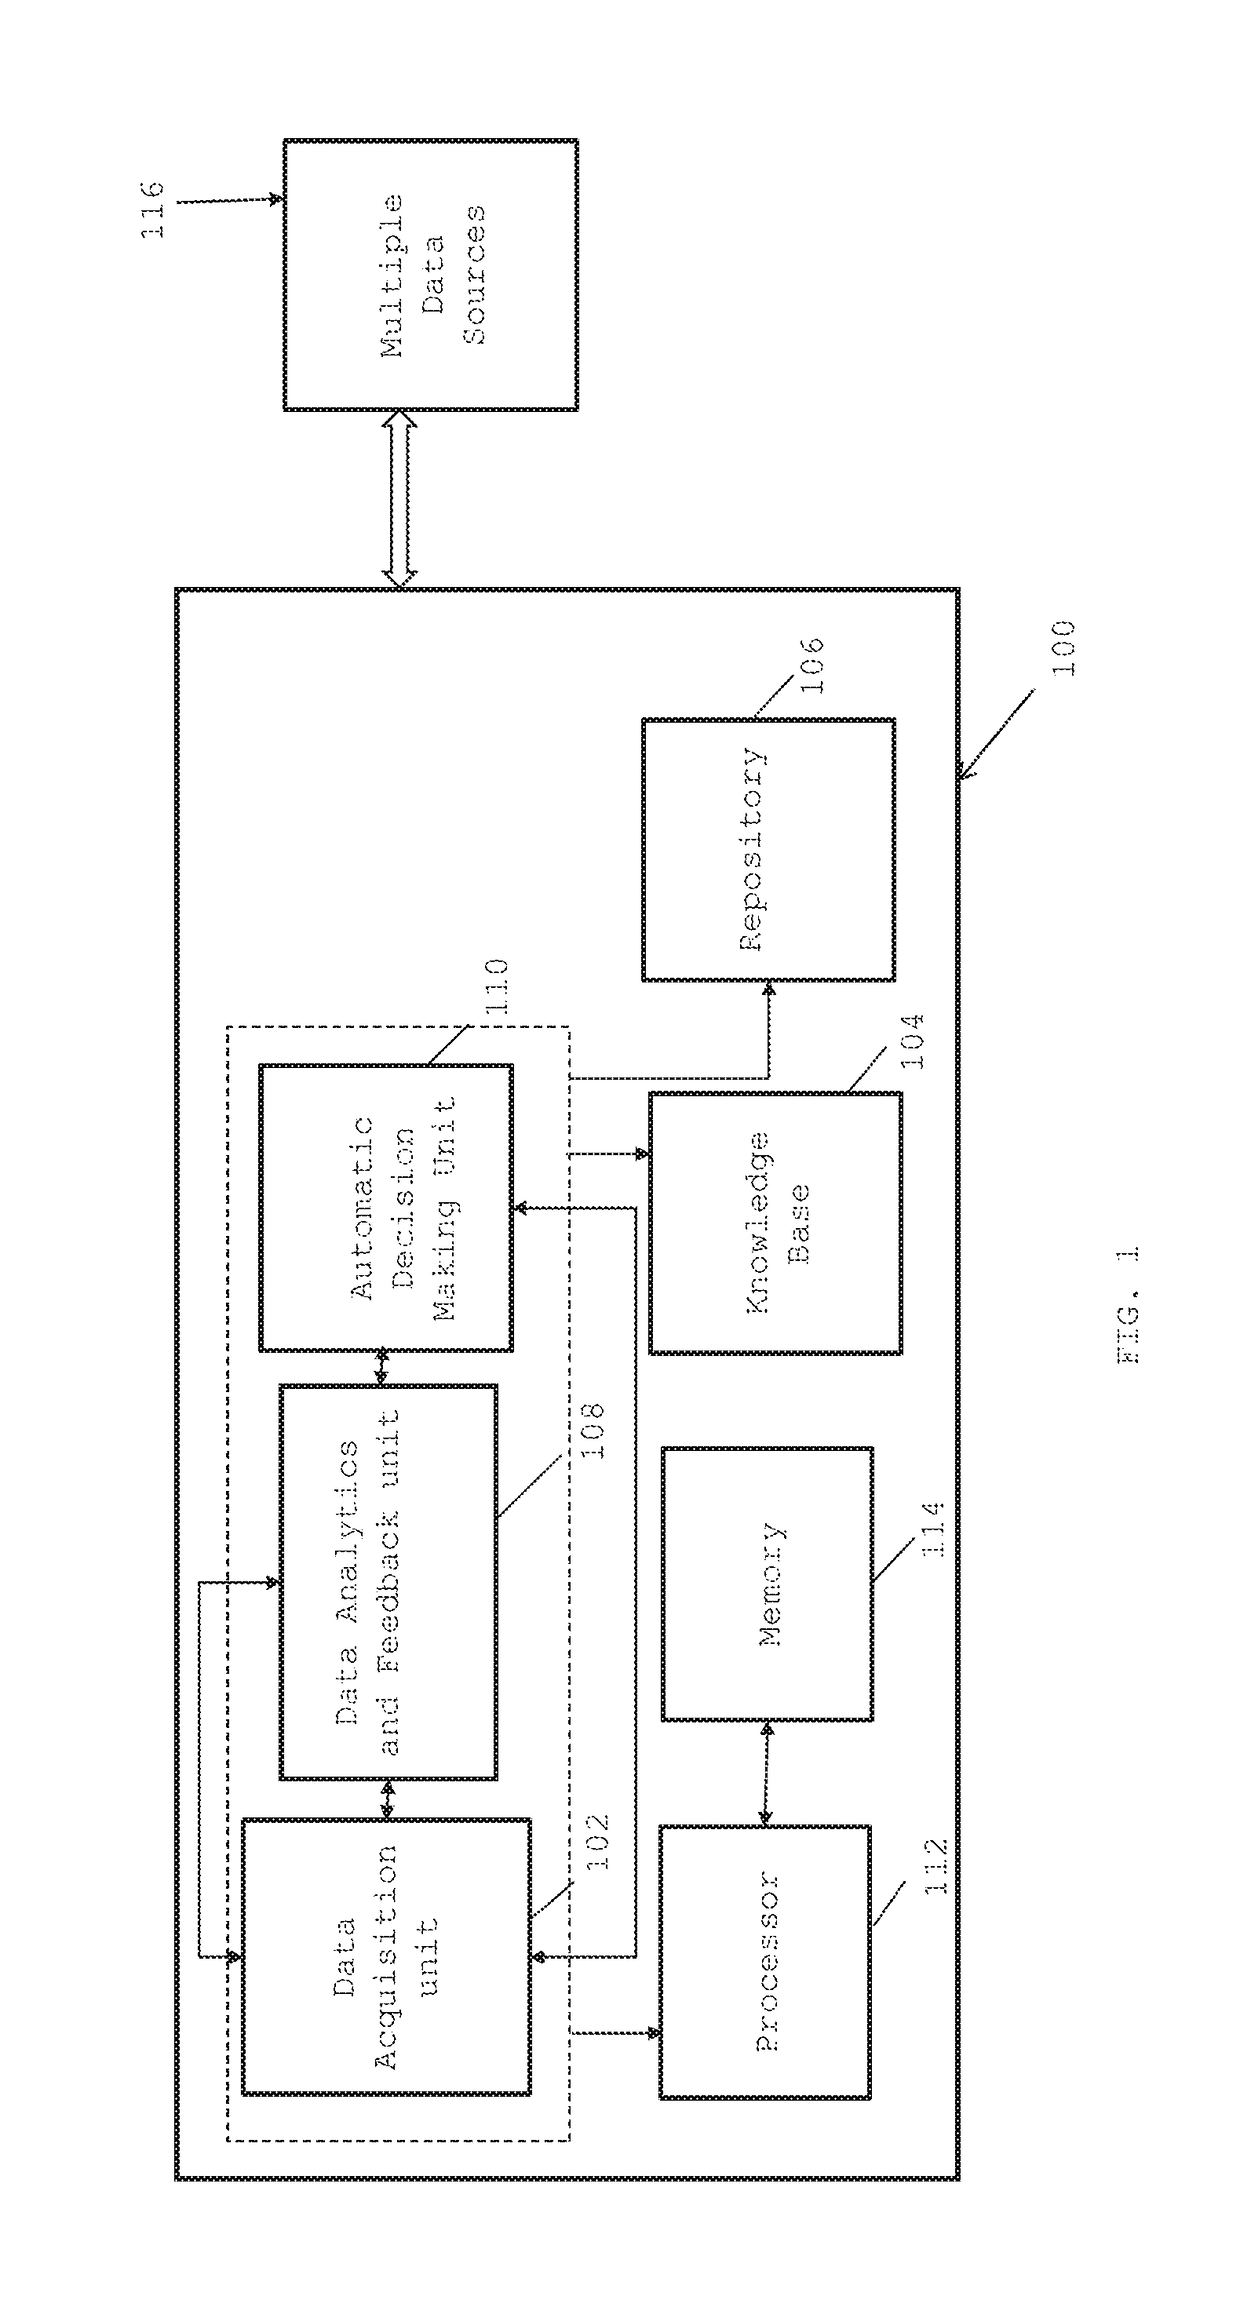 System and method for optimizing aggregation and analysis of data across multiple data sources